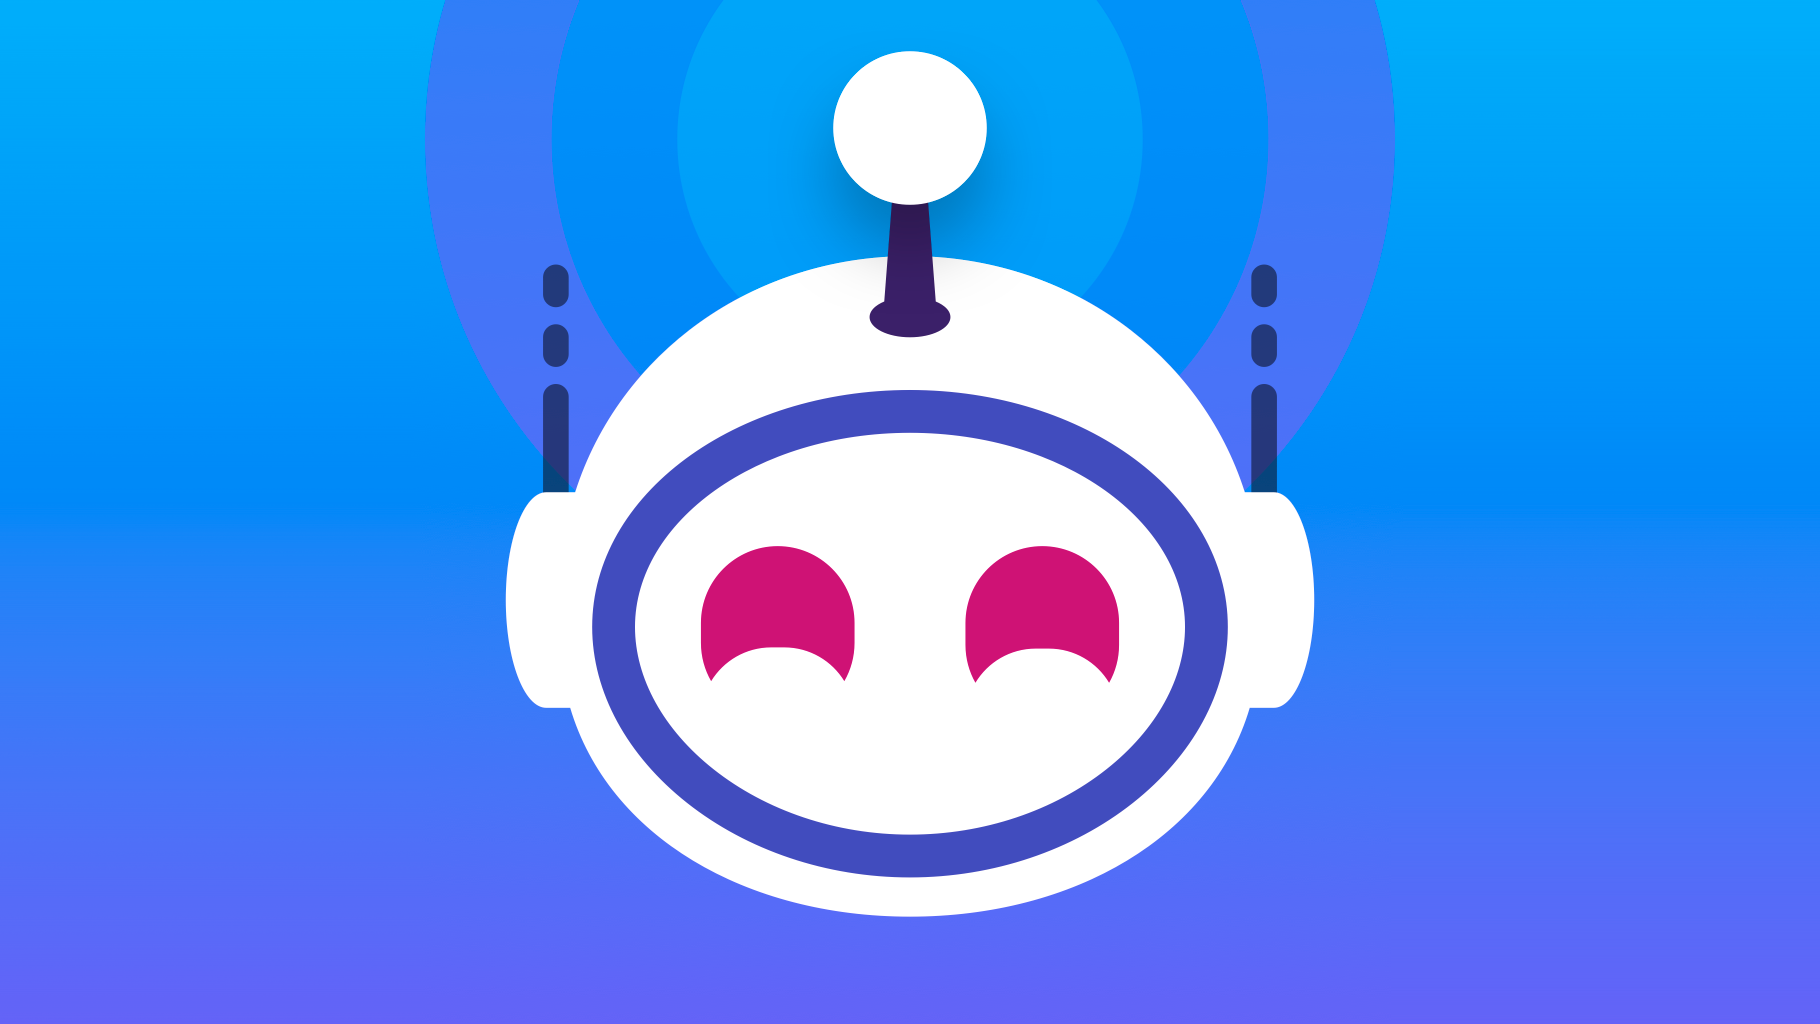 Popular Reddit App Apollo Shutting Down After Today, Pixel Pals Migration Feature Added